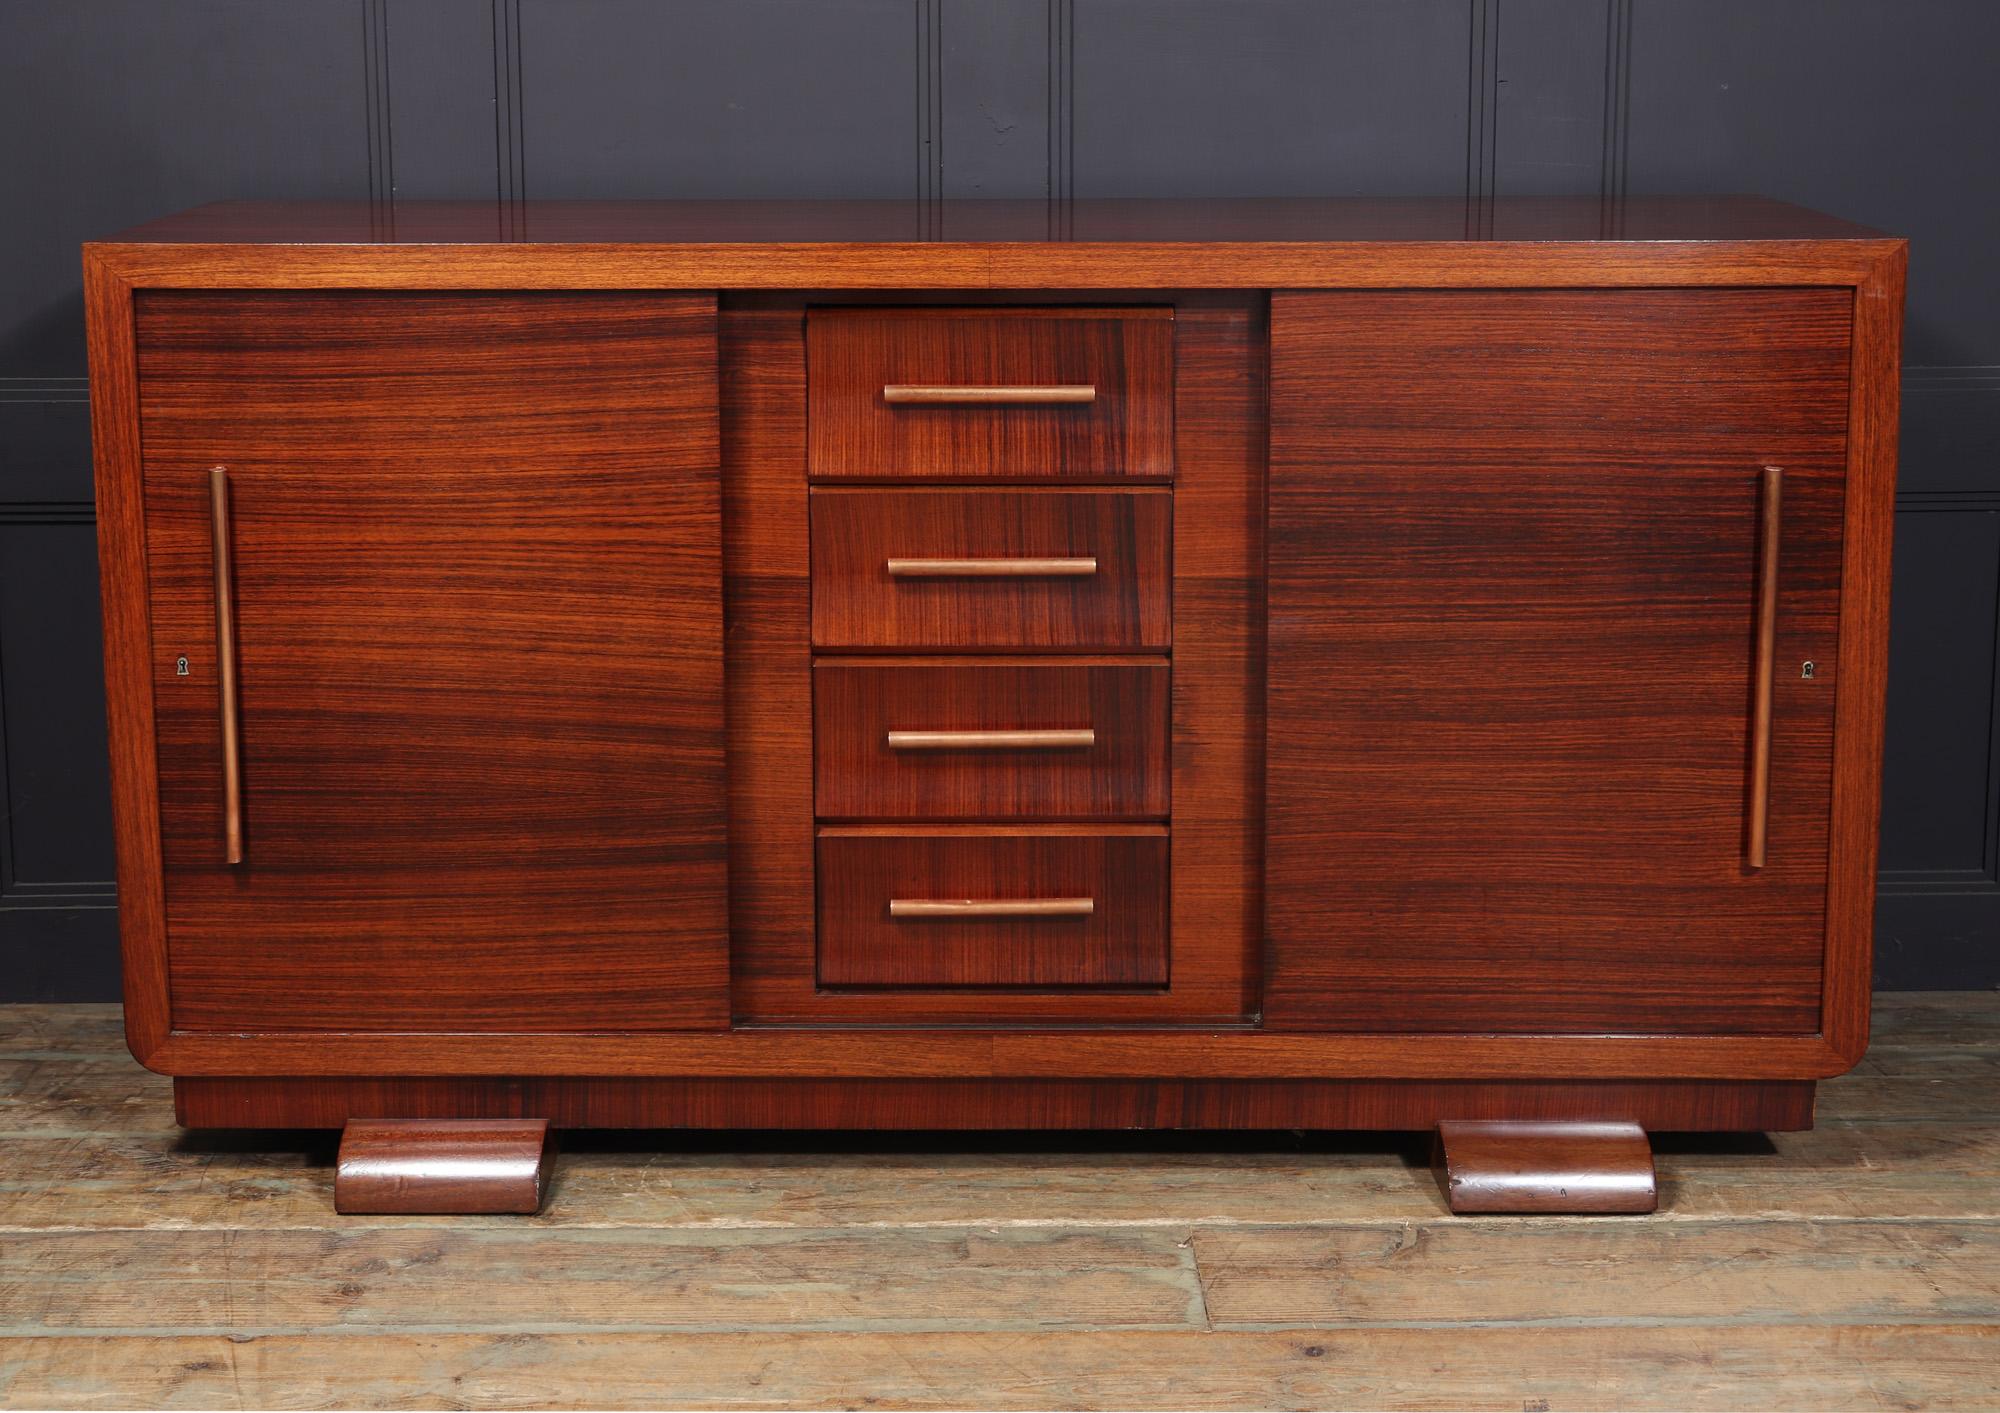 French Art Deco Sideboard with Sliding Doors In Excellent Condition For Sale In Paddock Wood Tonbridge, GB